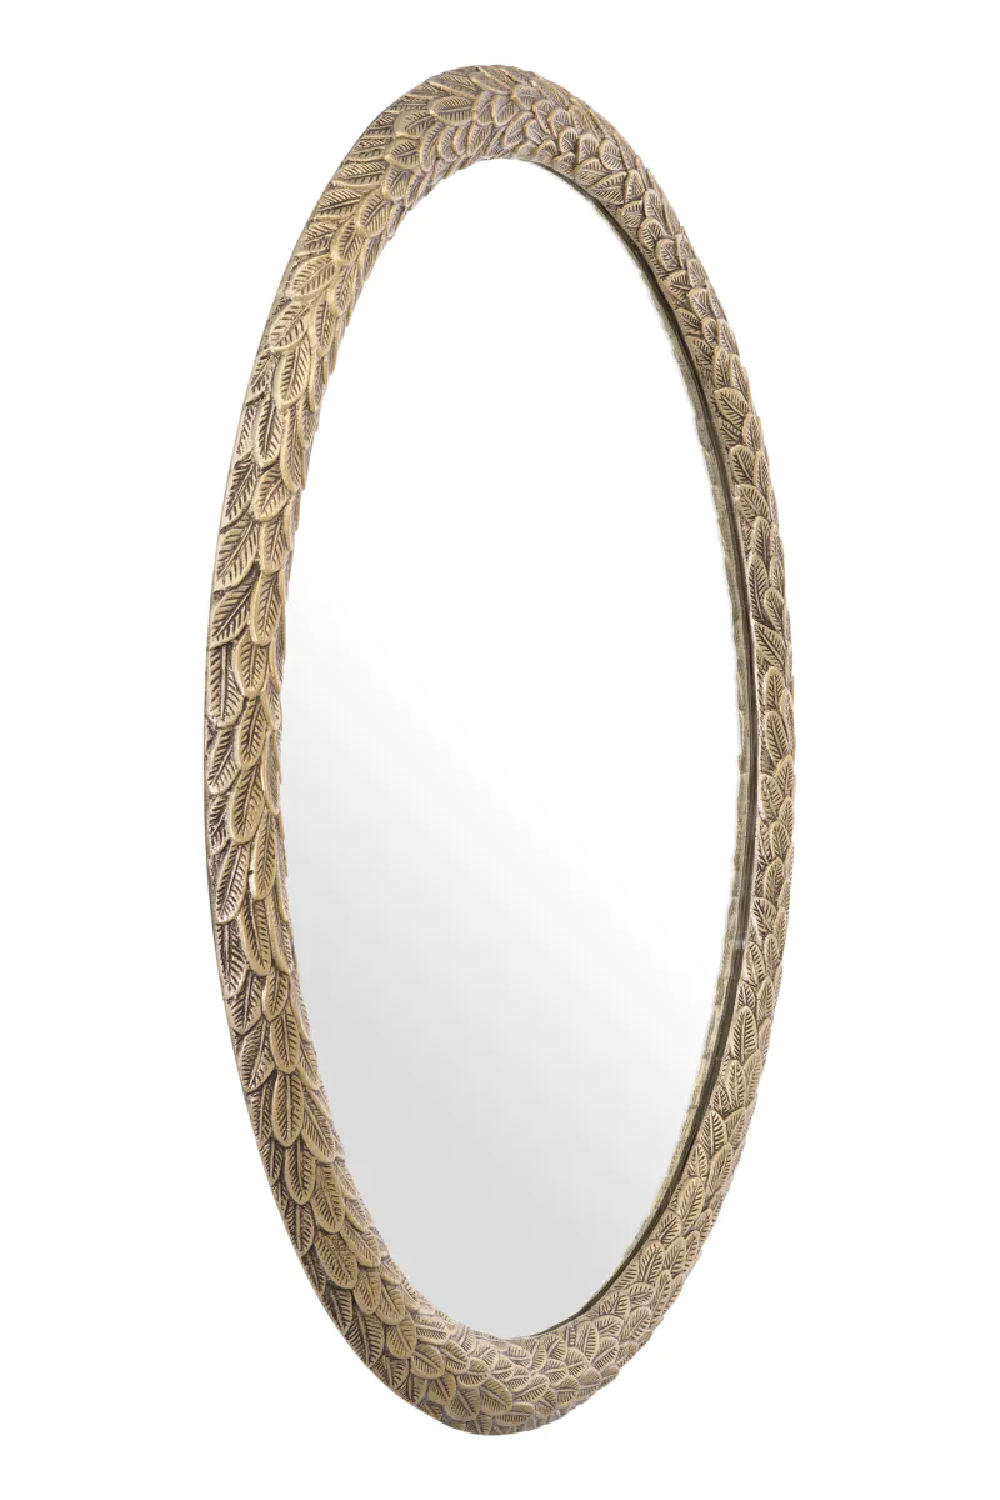 Leaves Patterned Oval Mirror | Eichholtz Soave | Oroa.com